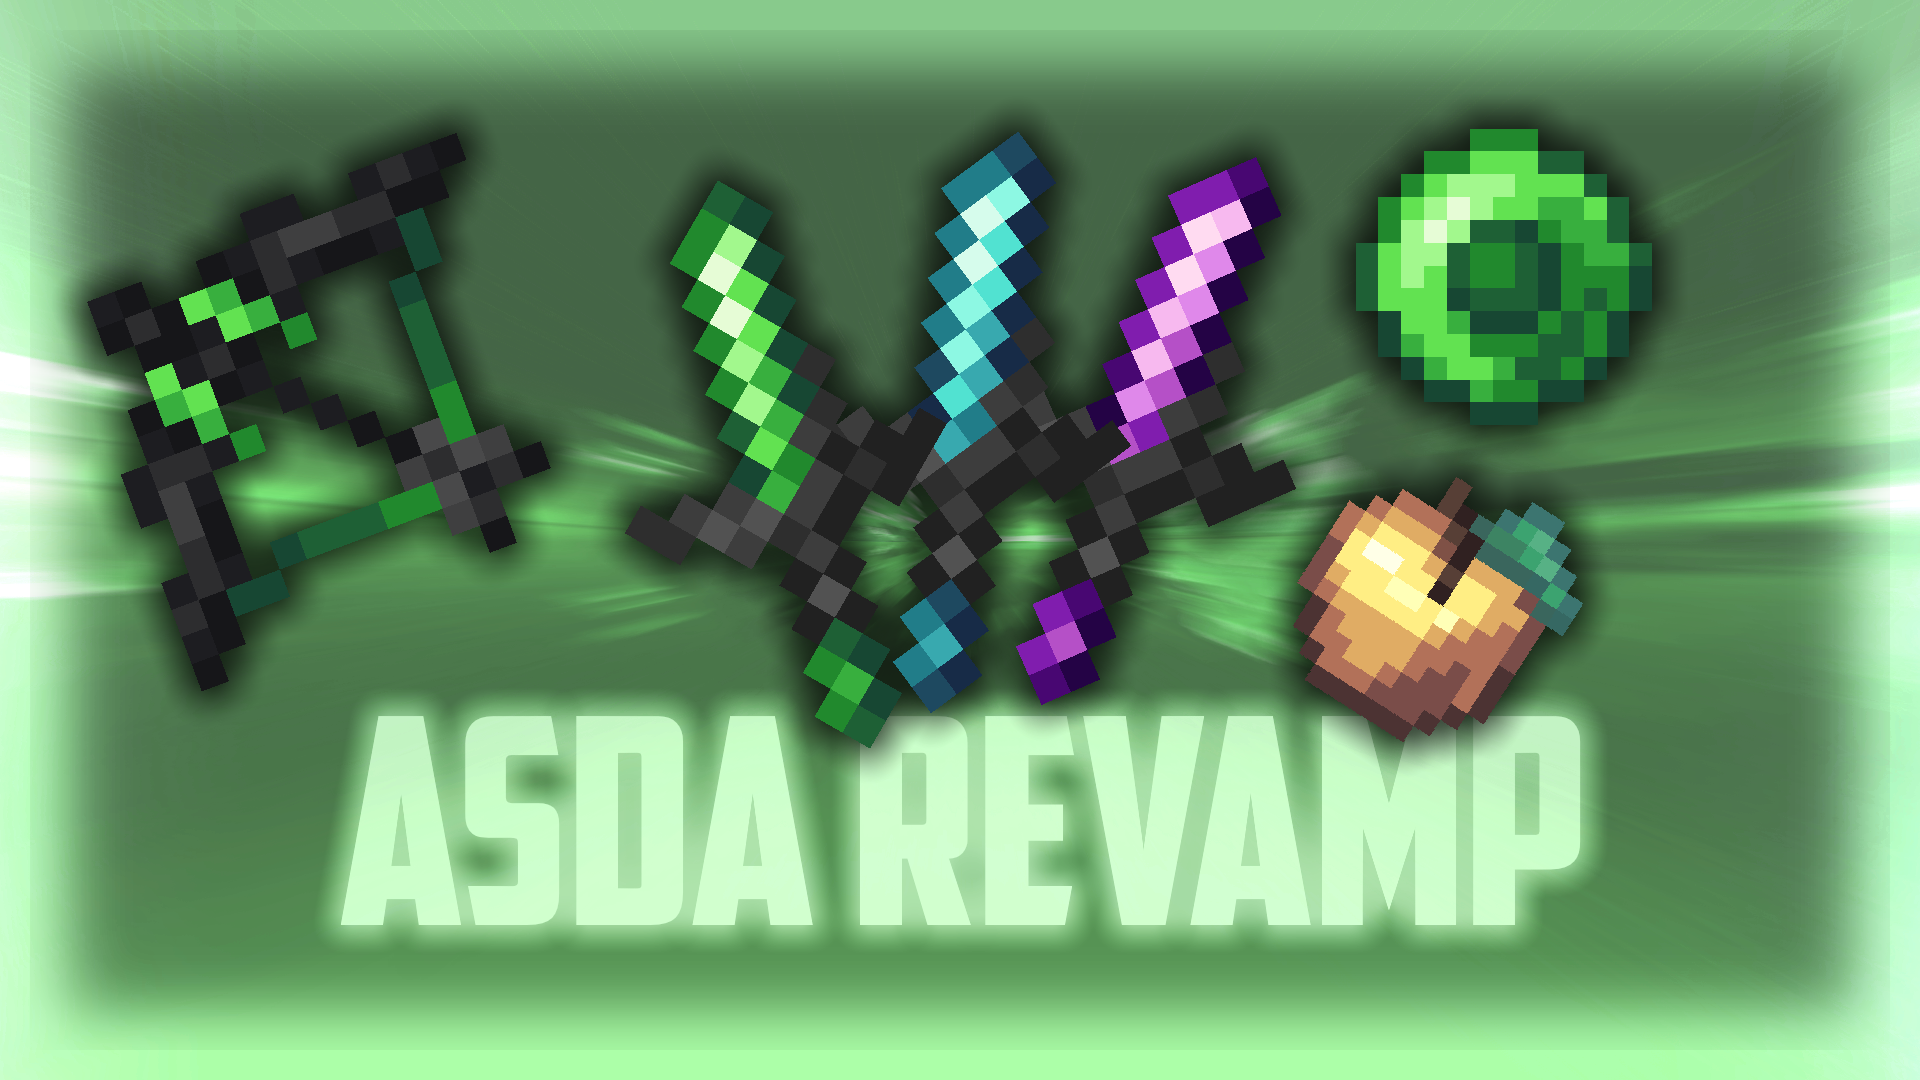 Asda Revamp  16 by Zlax on PvPRP